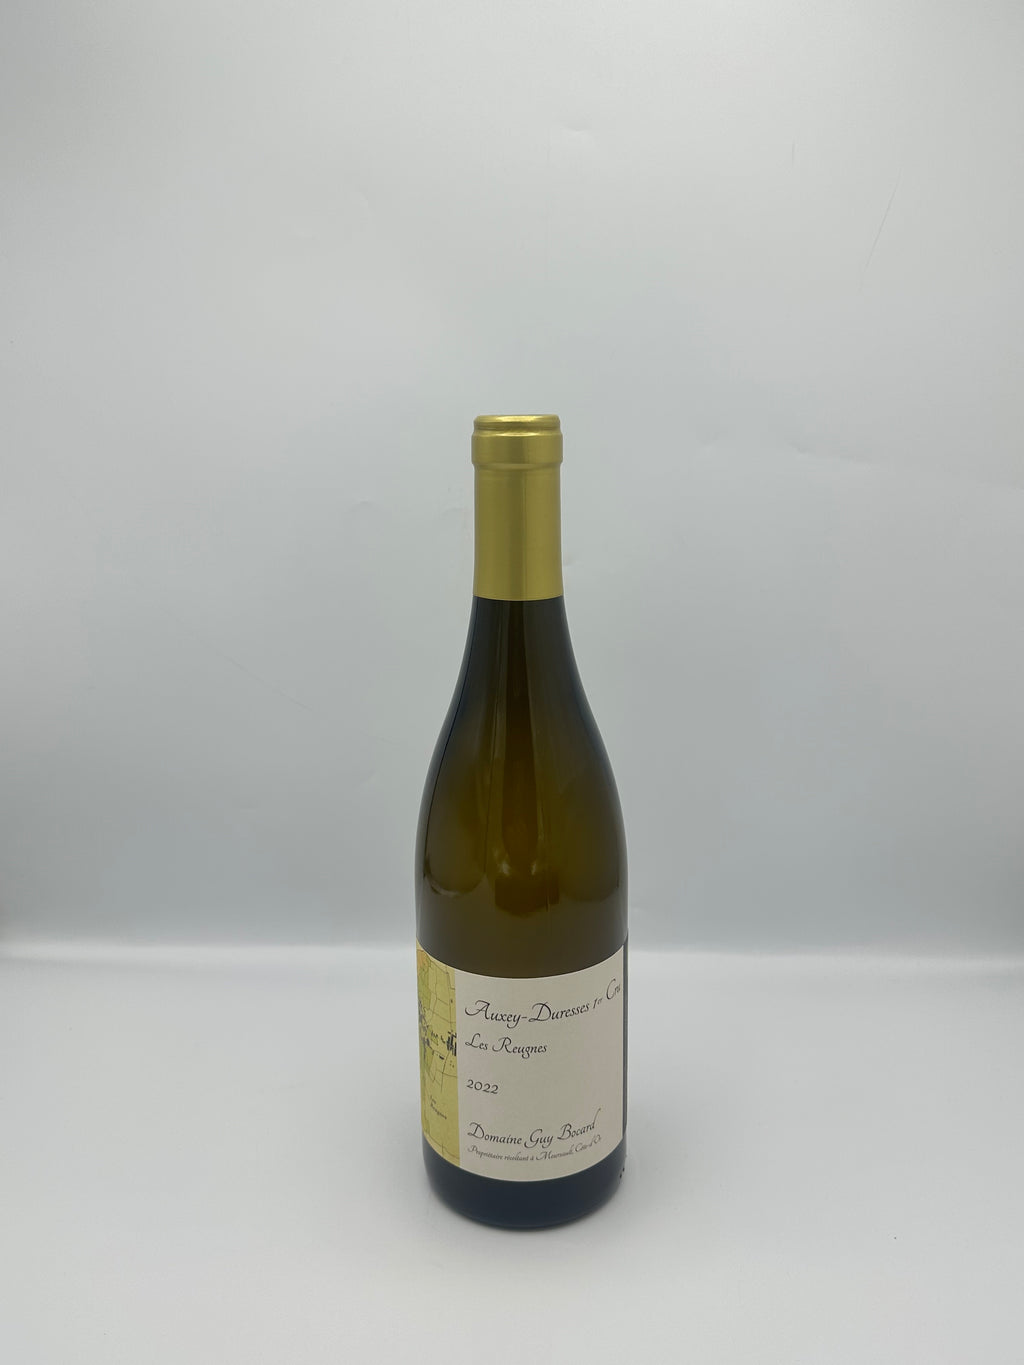 Auxey Duresses 1er Cru 2022 White - Domaine Guy Bocard